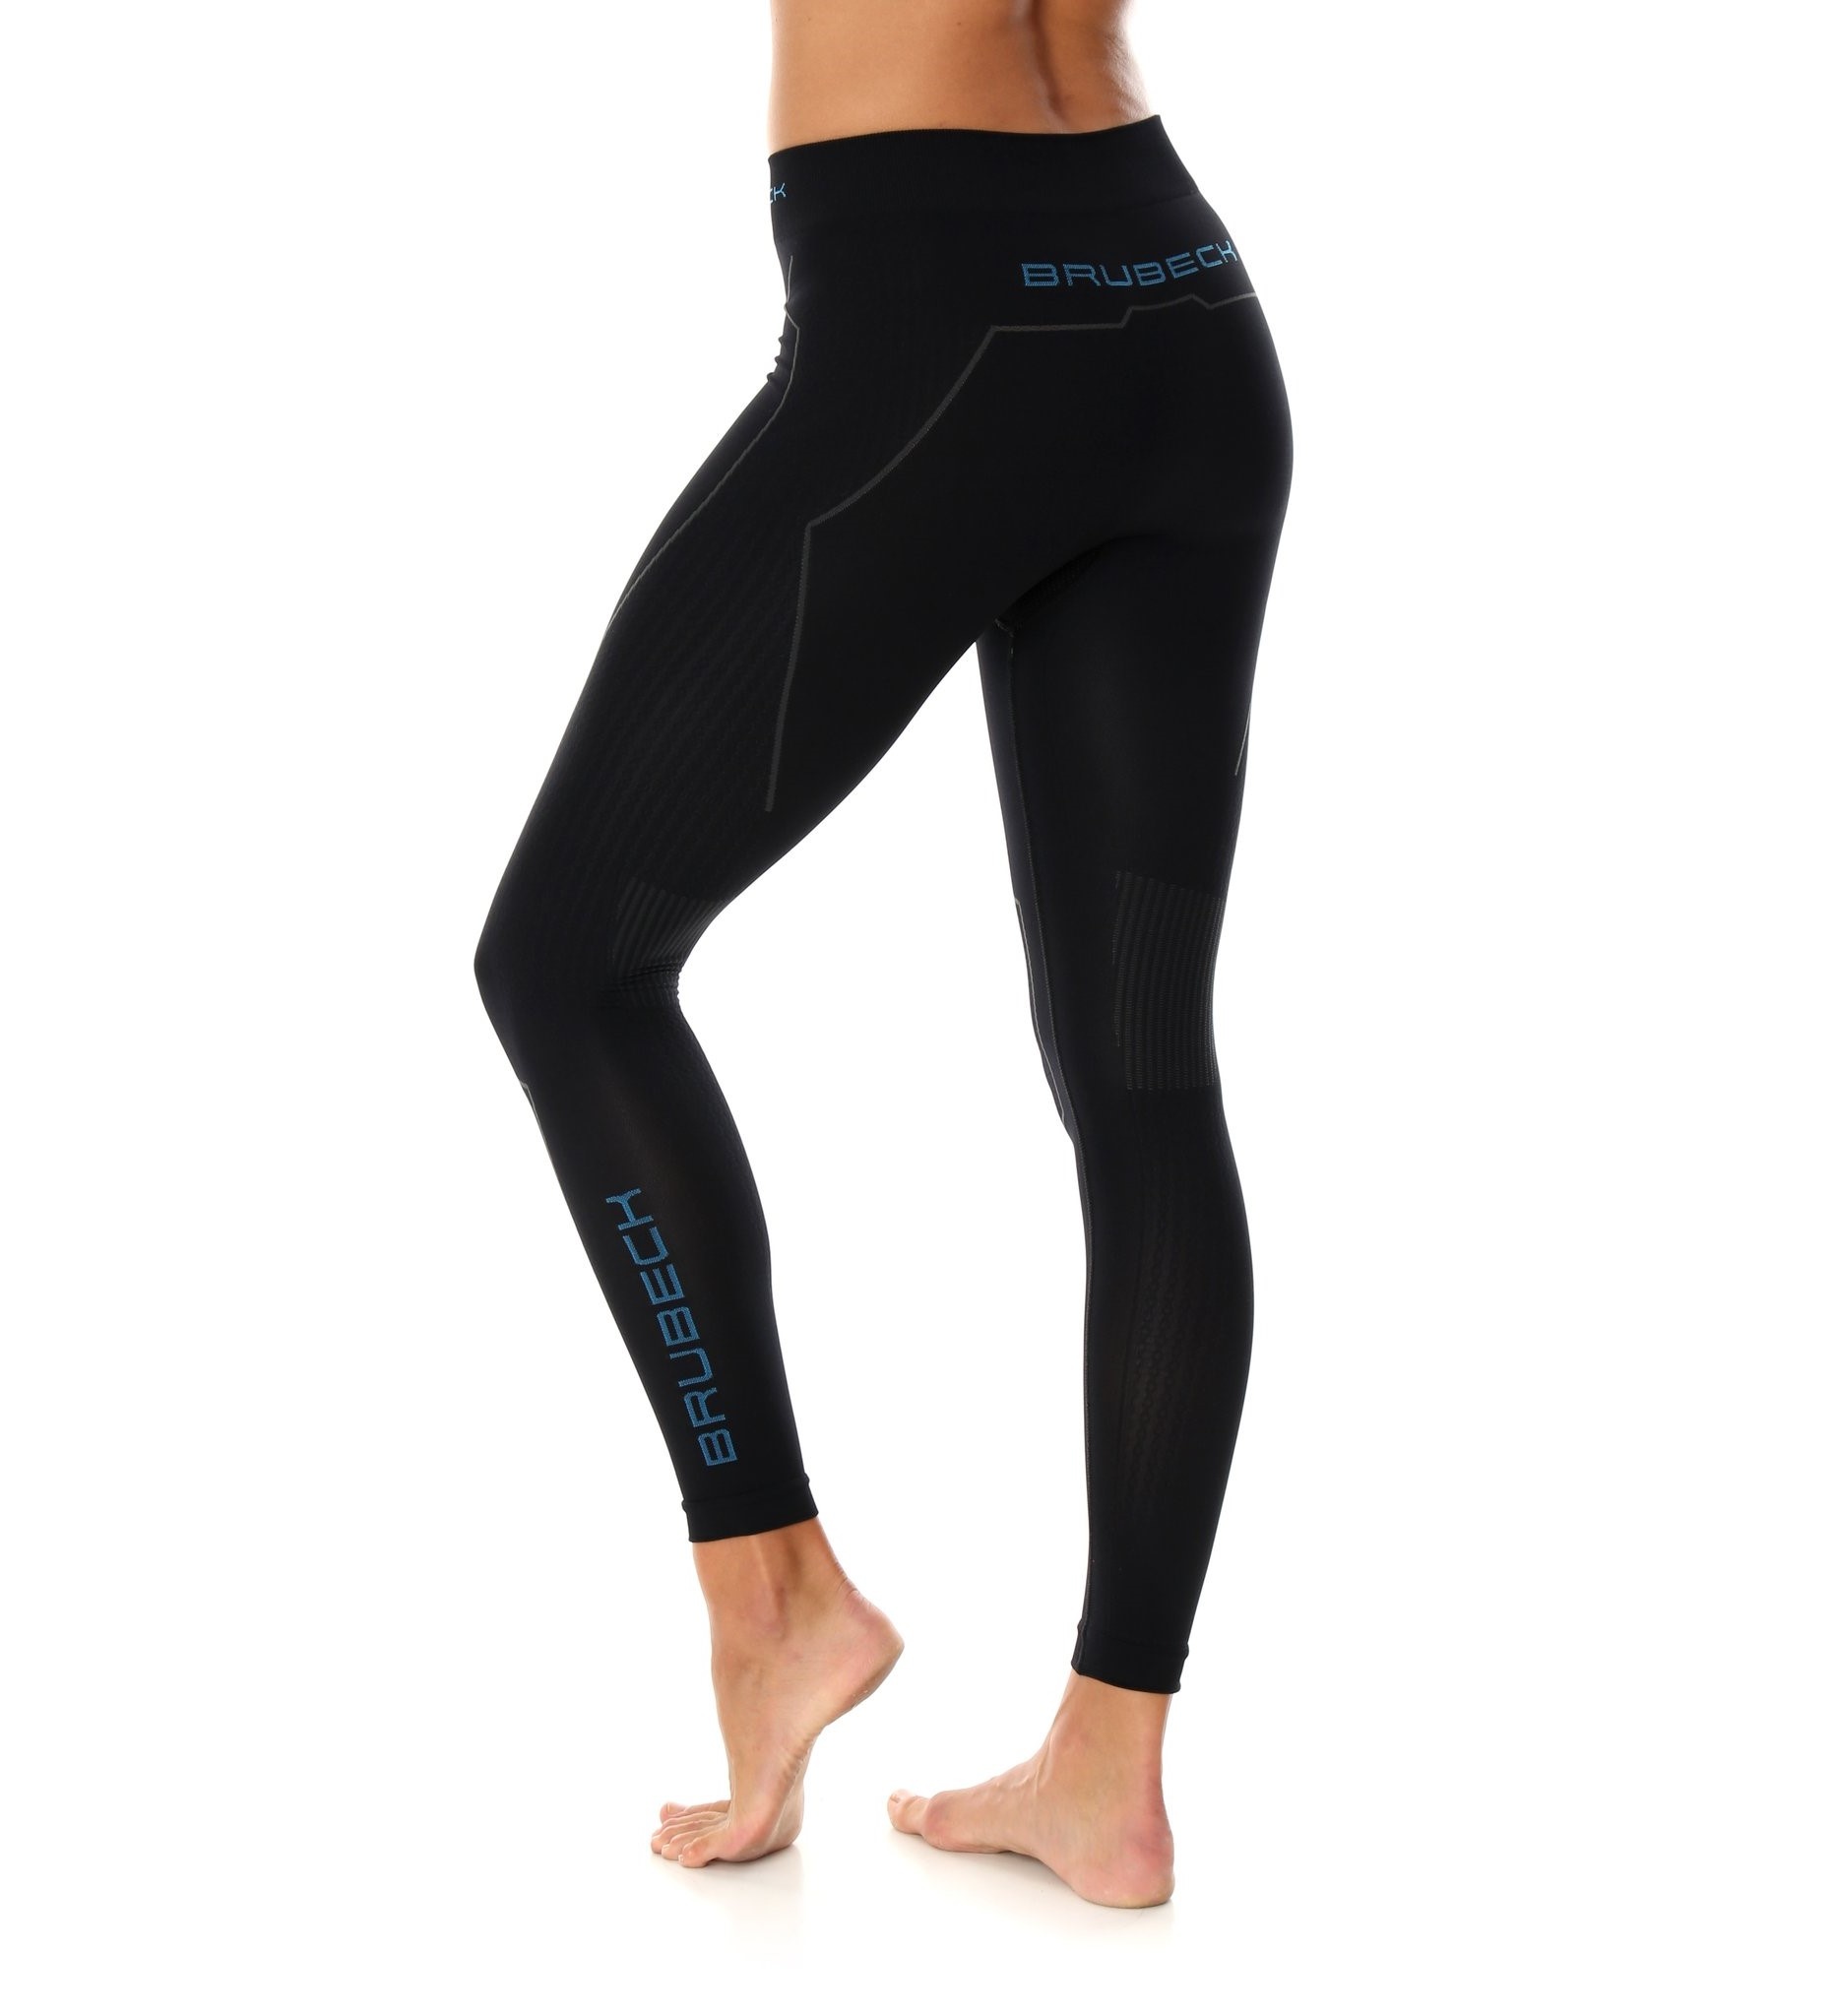 Brubeck Women's Thermo Pants